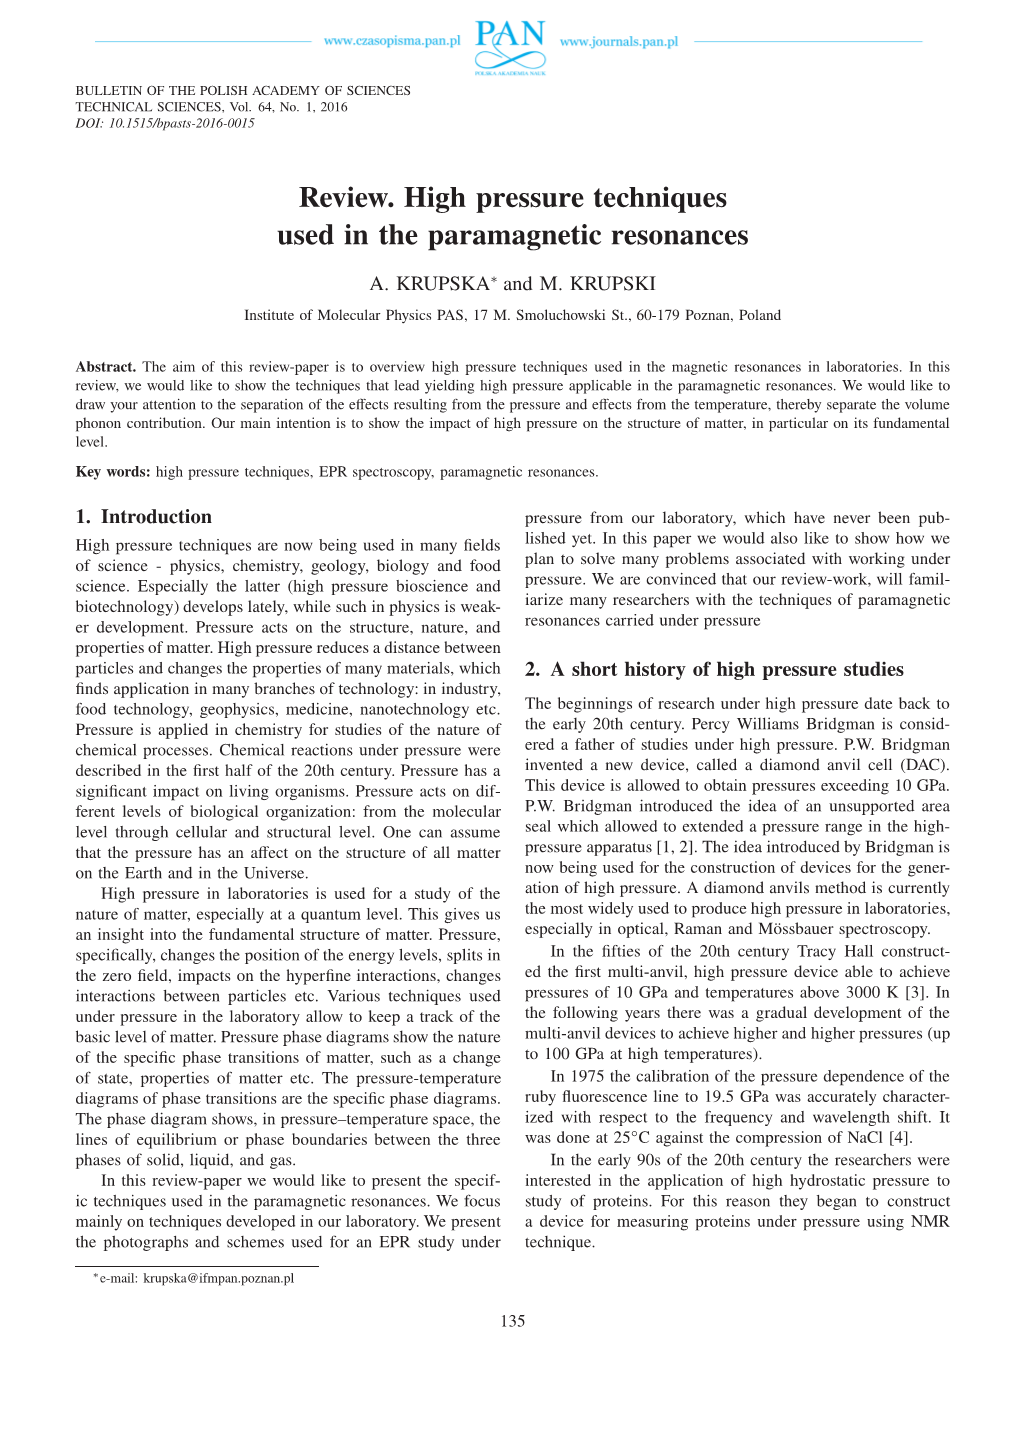 Review. High Pressure Techniques Used in the Paramagnetic Resonances